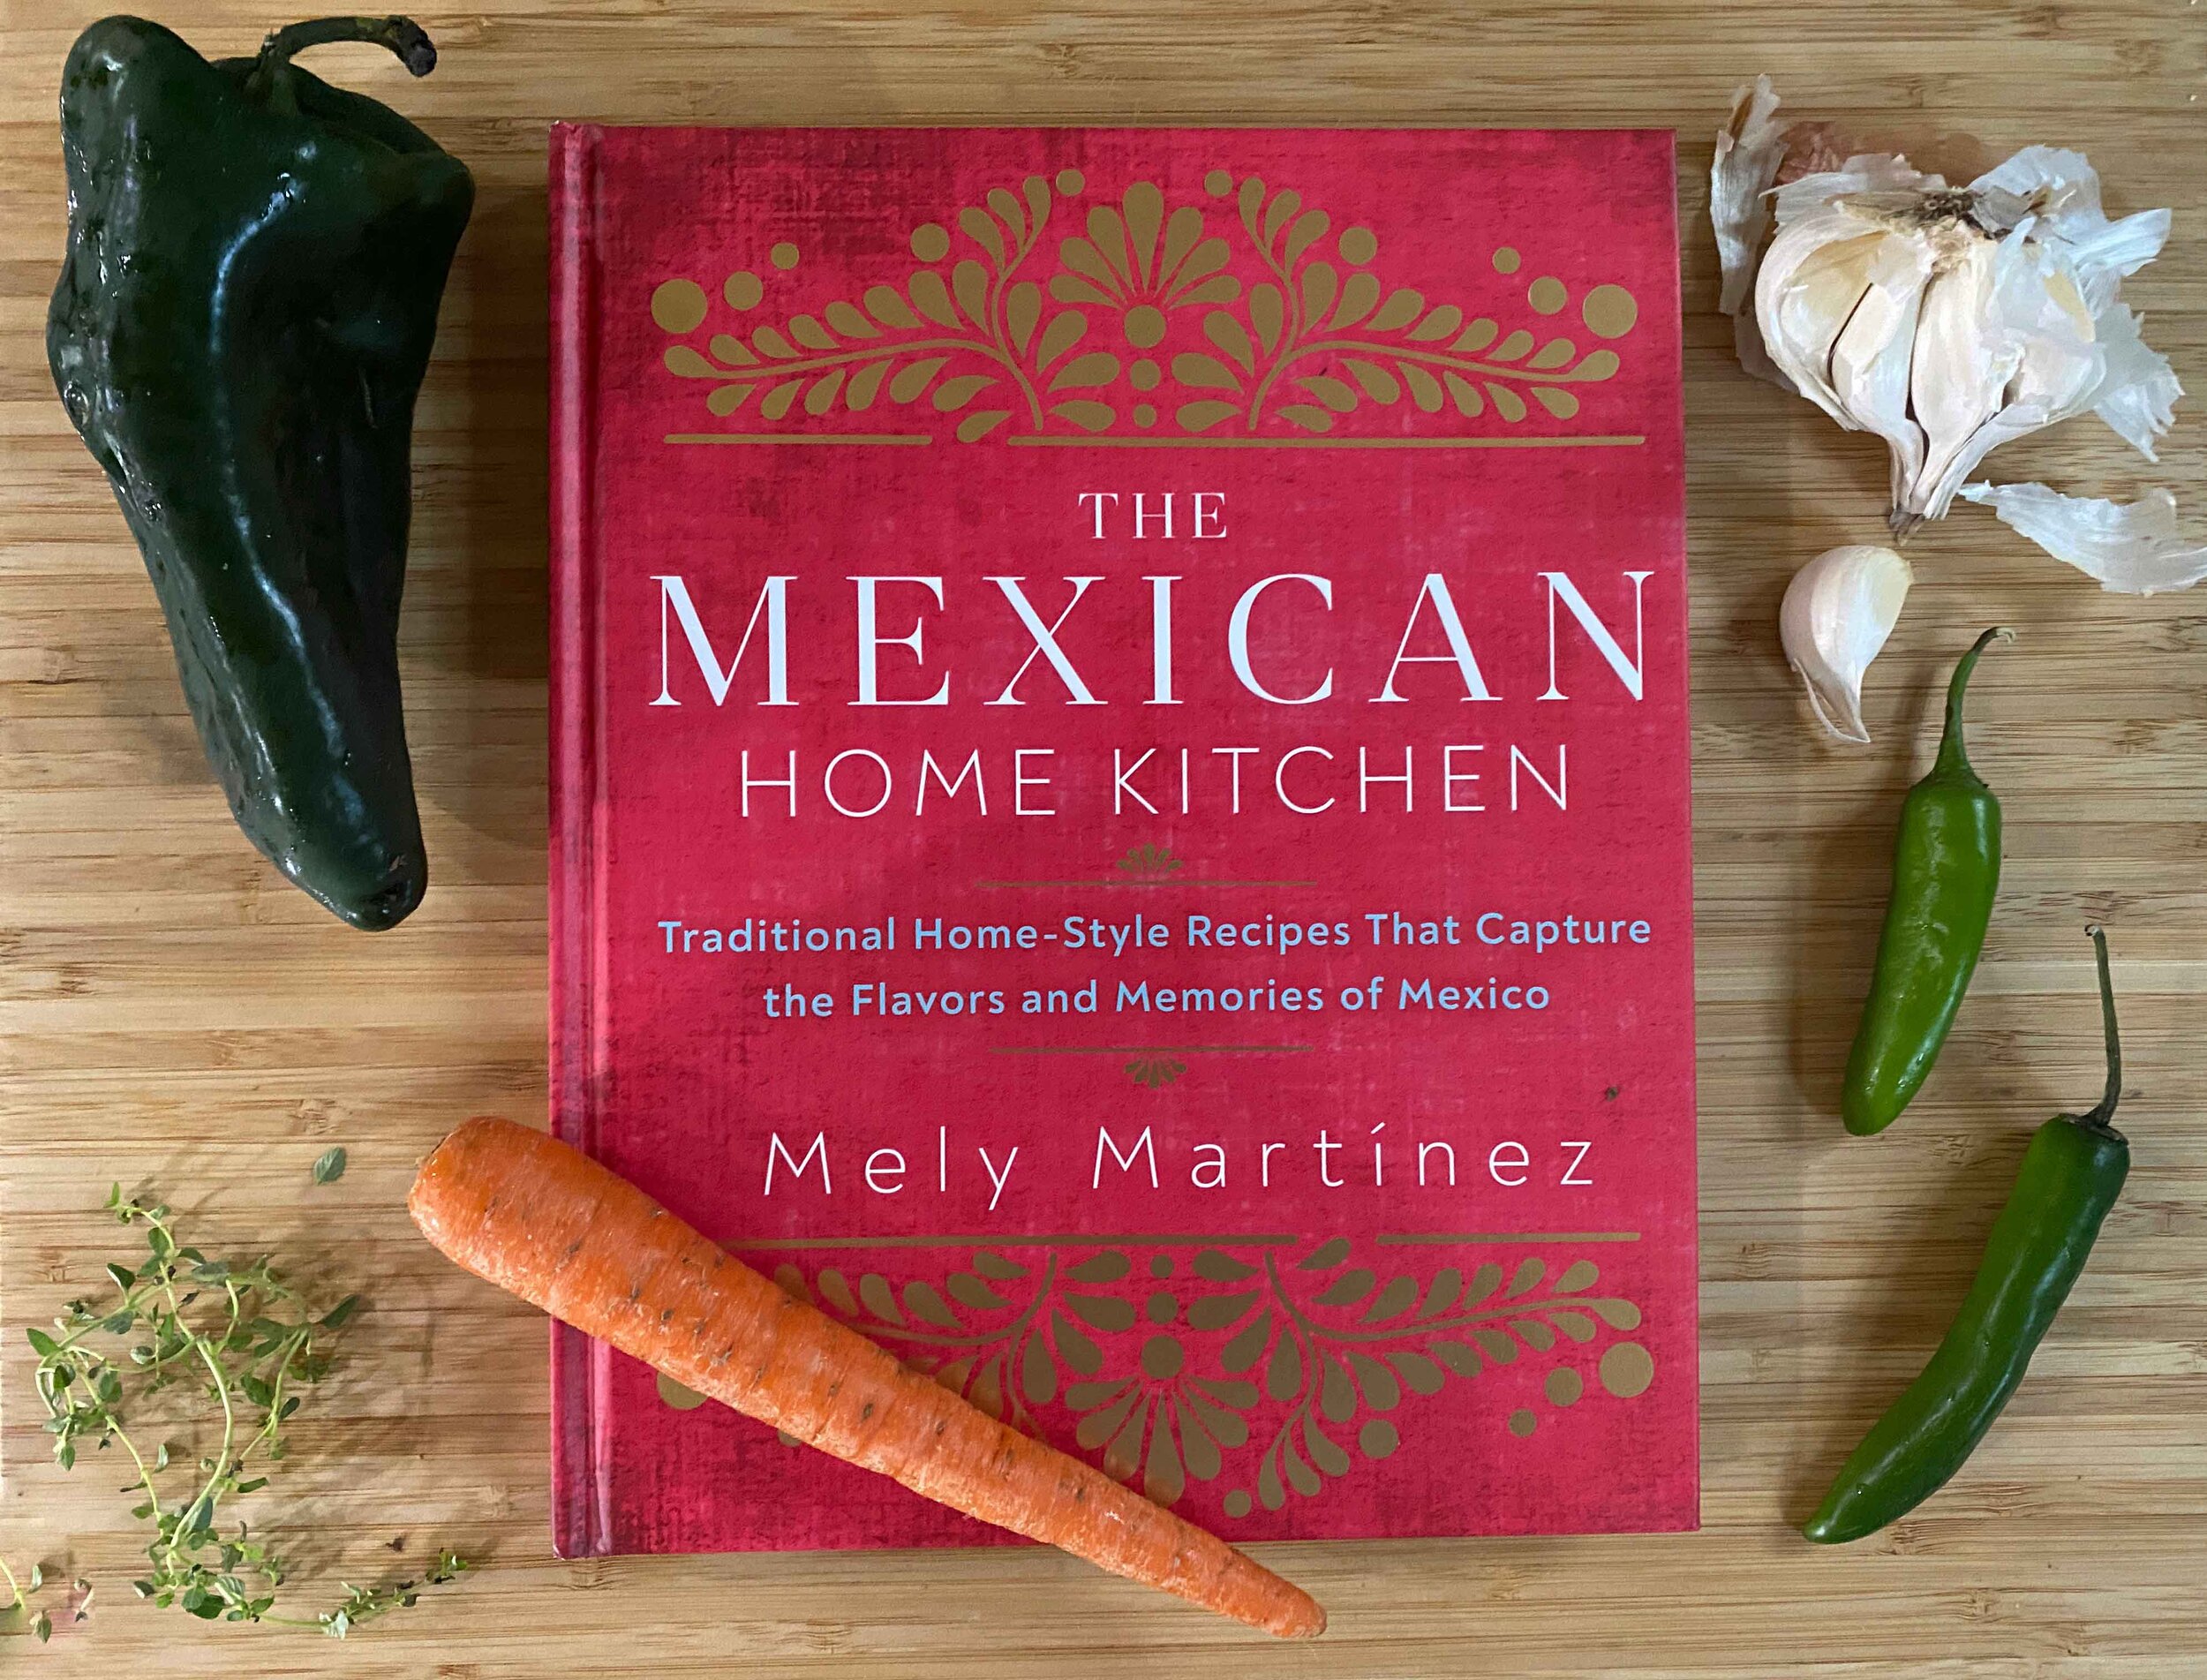 Mexican mommy makes her homemade non-professional debut